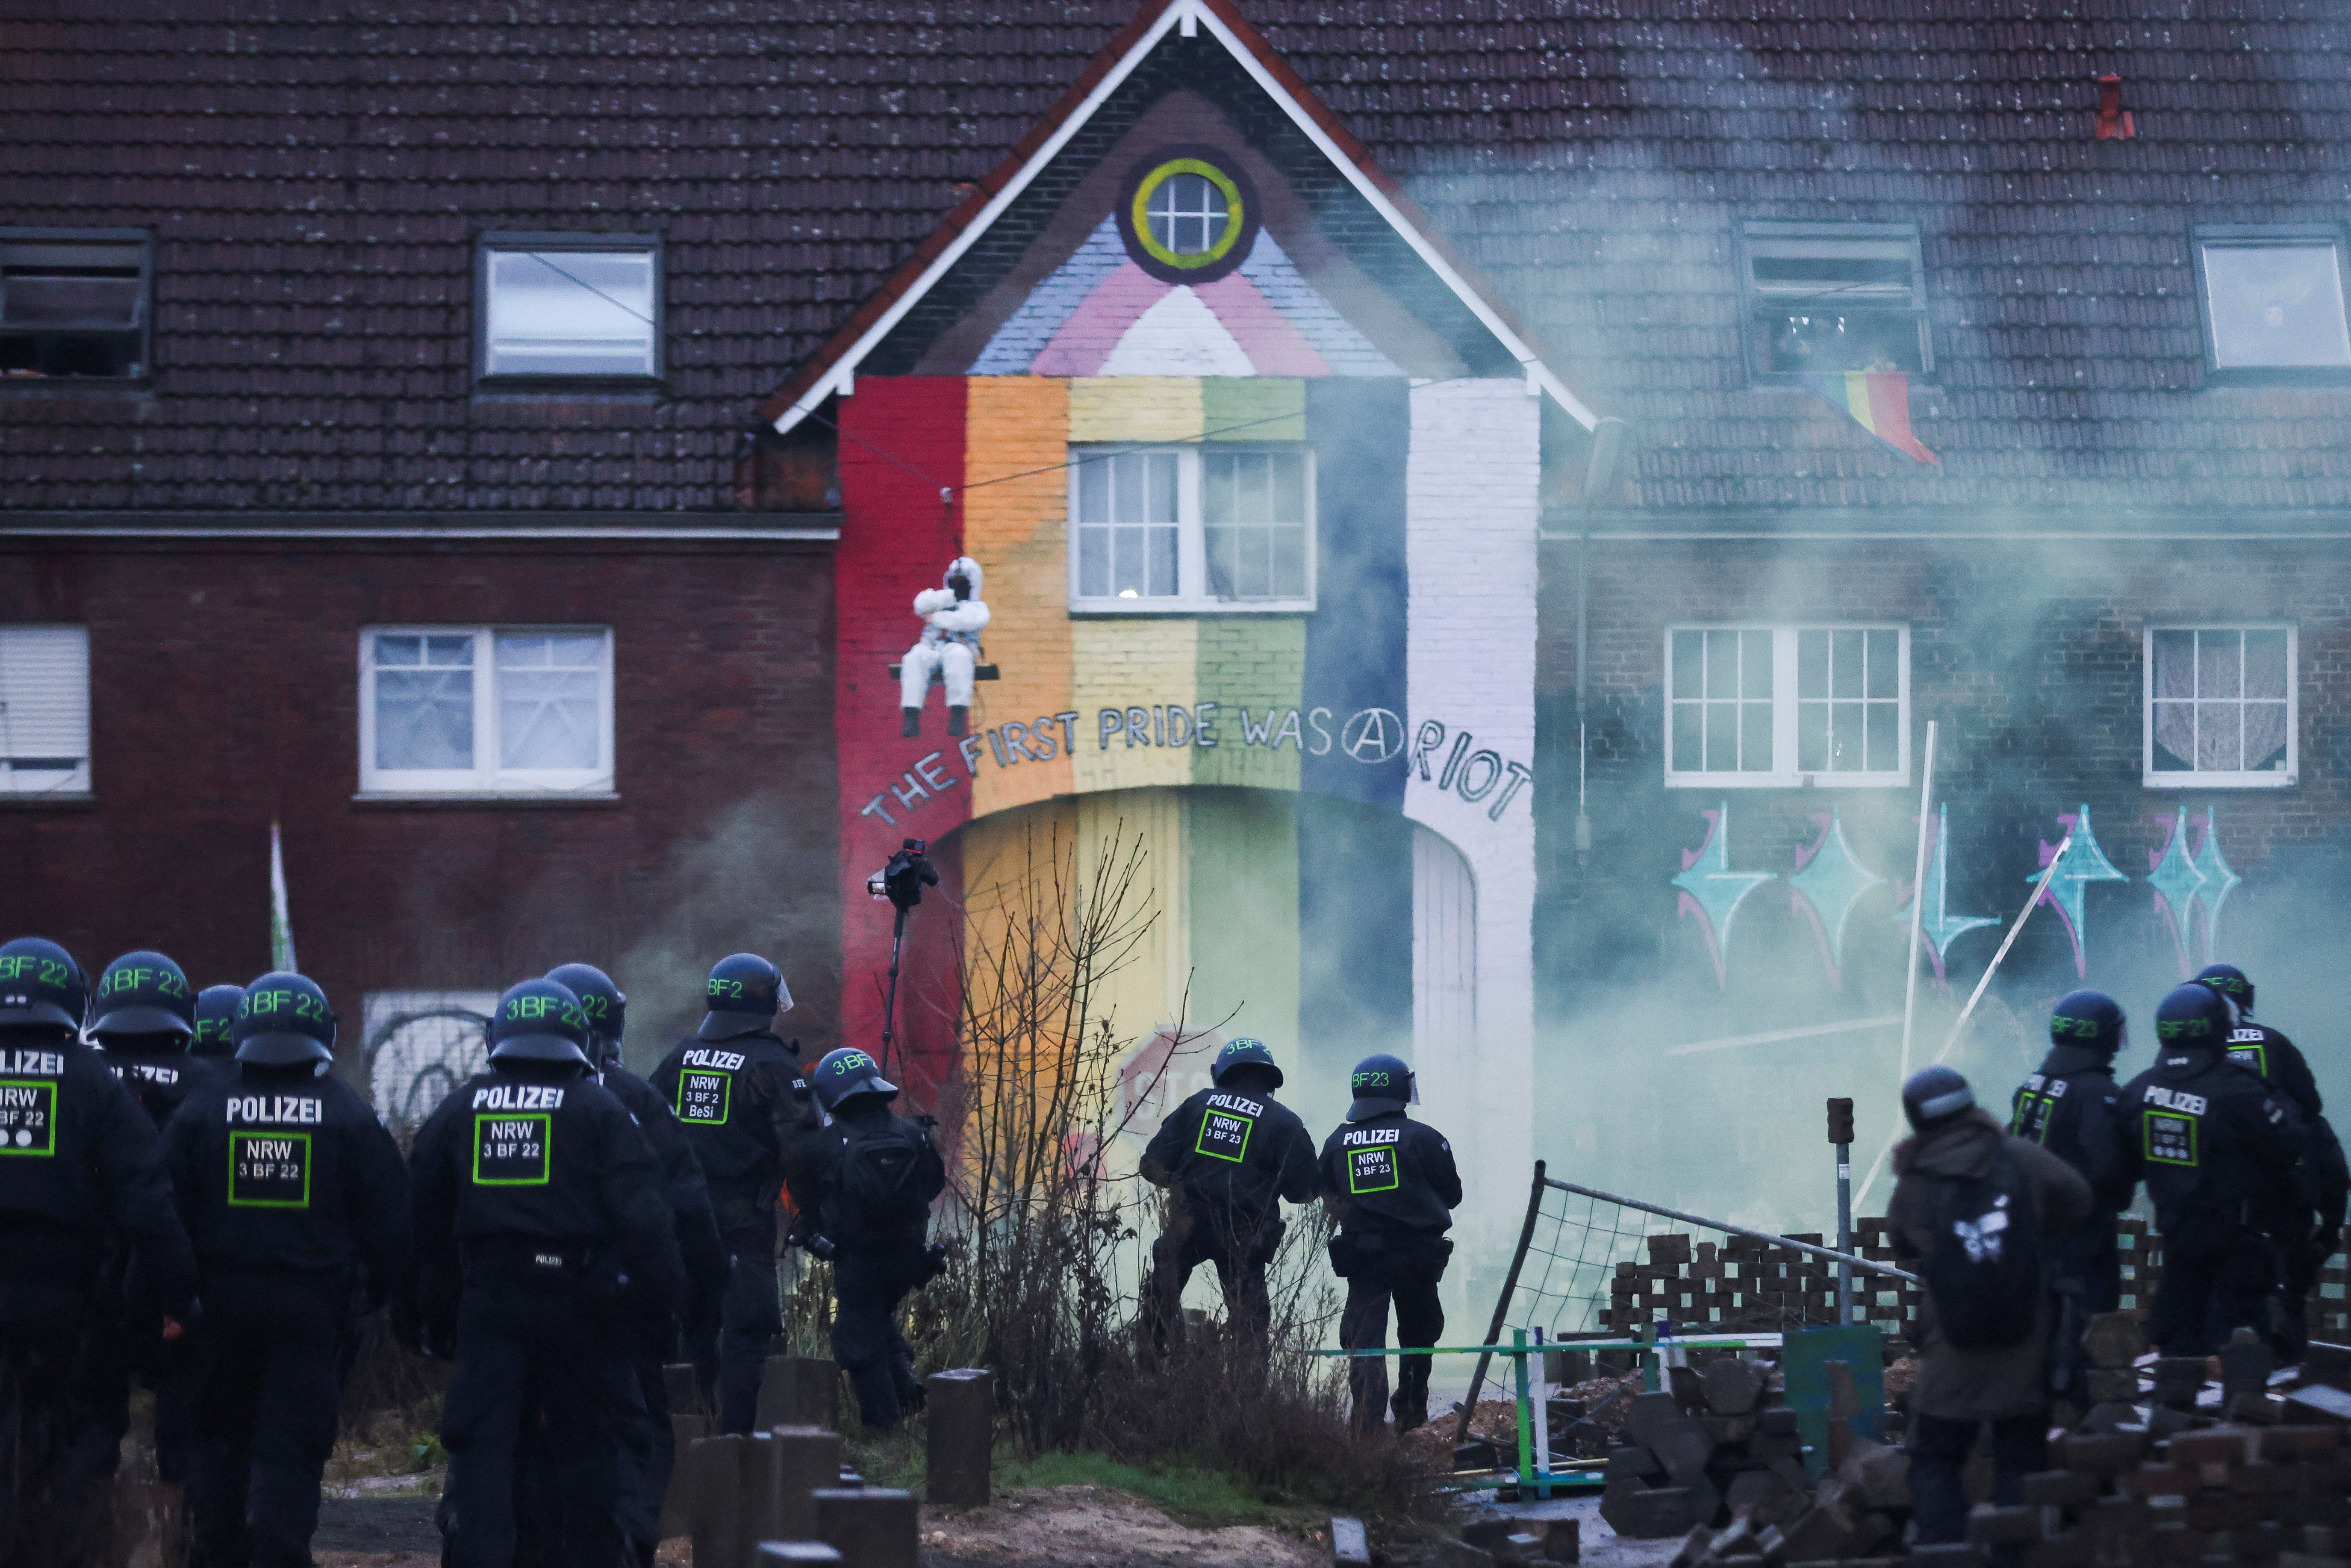 Police move on coal mine protesters barricaded in abandoned German village